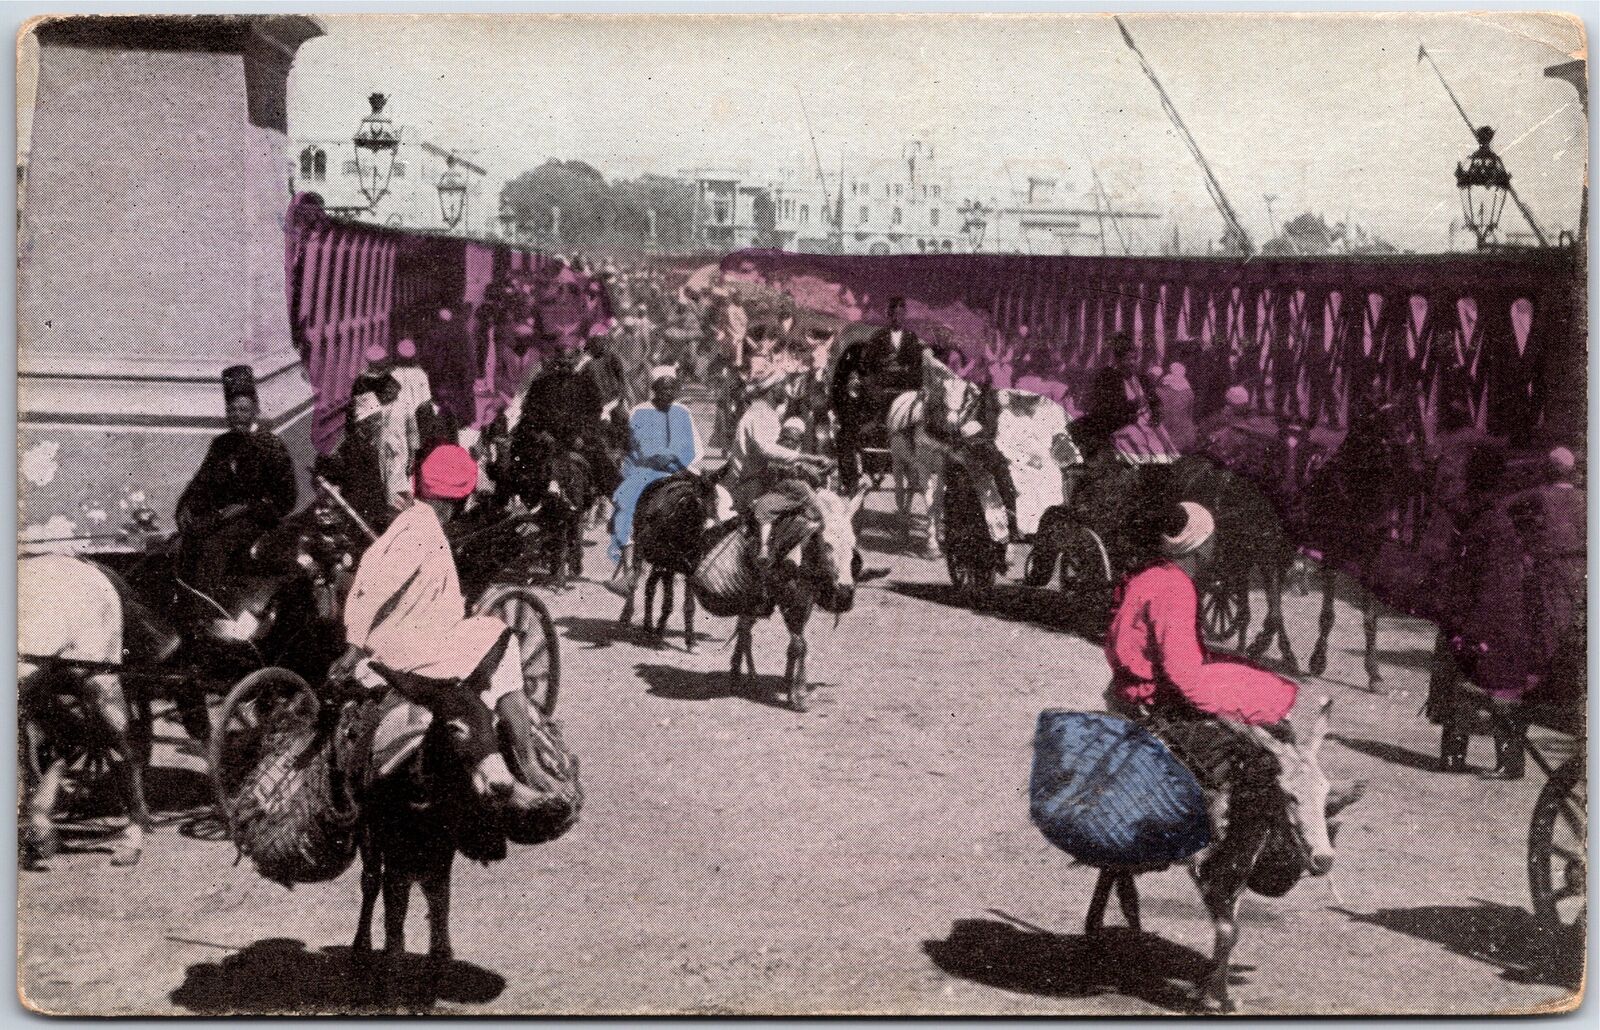 VINTAGE POSTCARD CROWDED STREET SCENE AT THE GREAT NILE BRIDGE IN EGYPT c. 1910